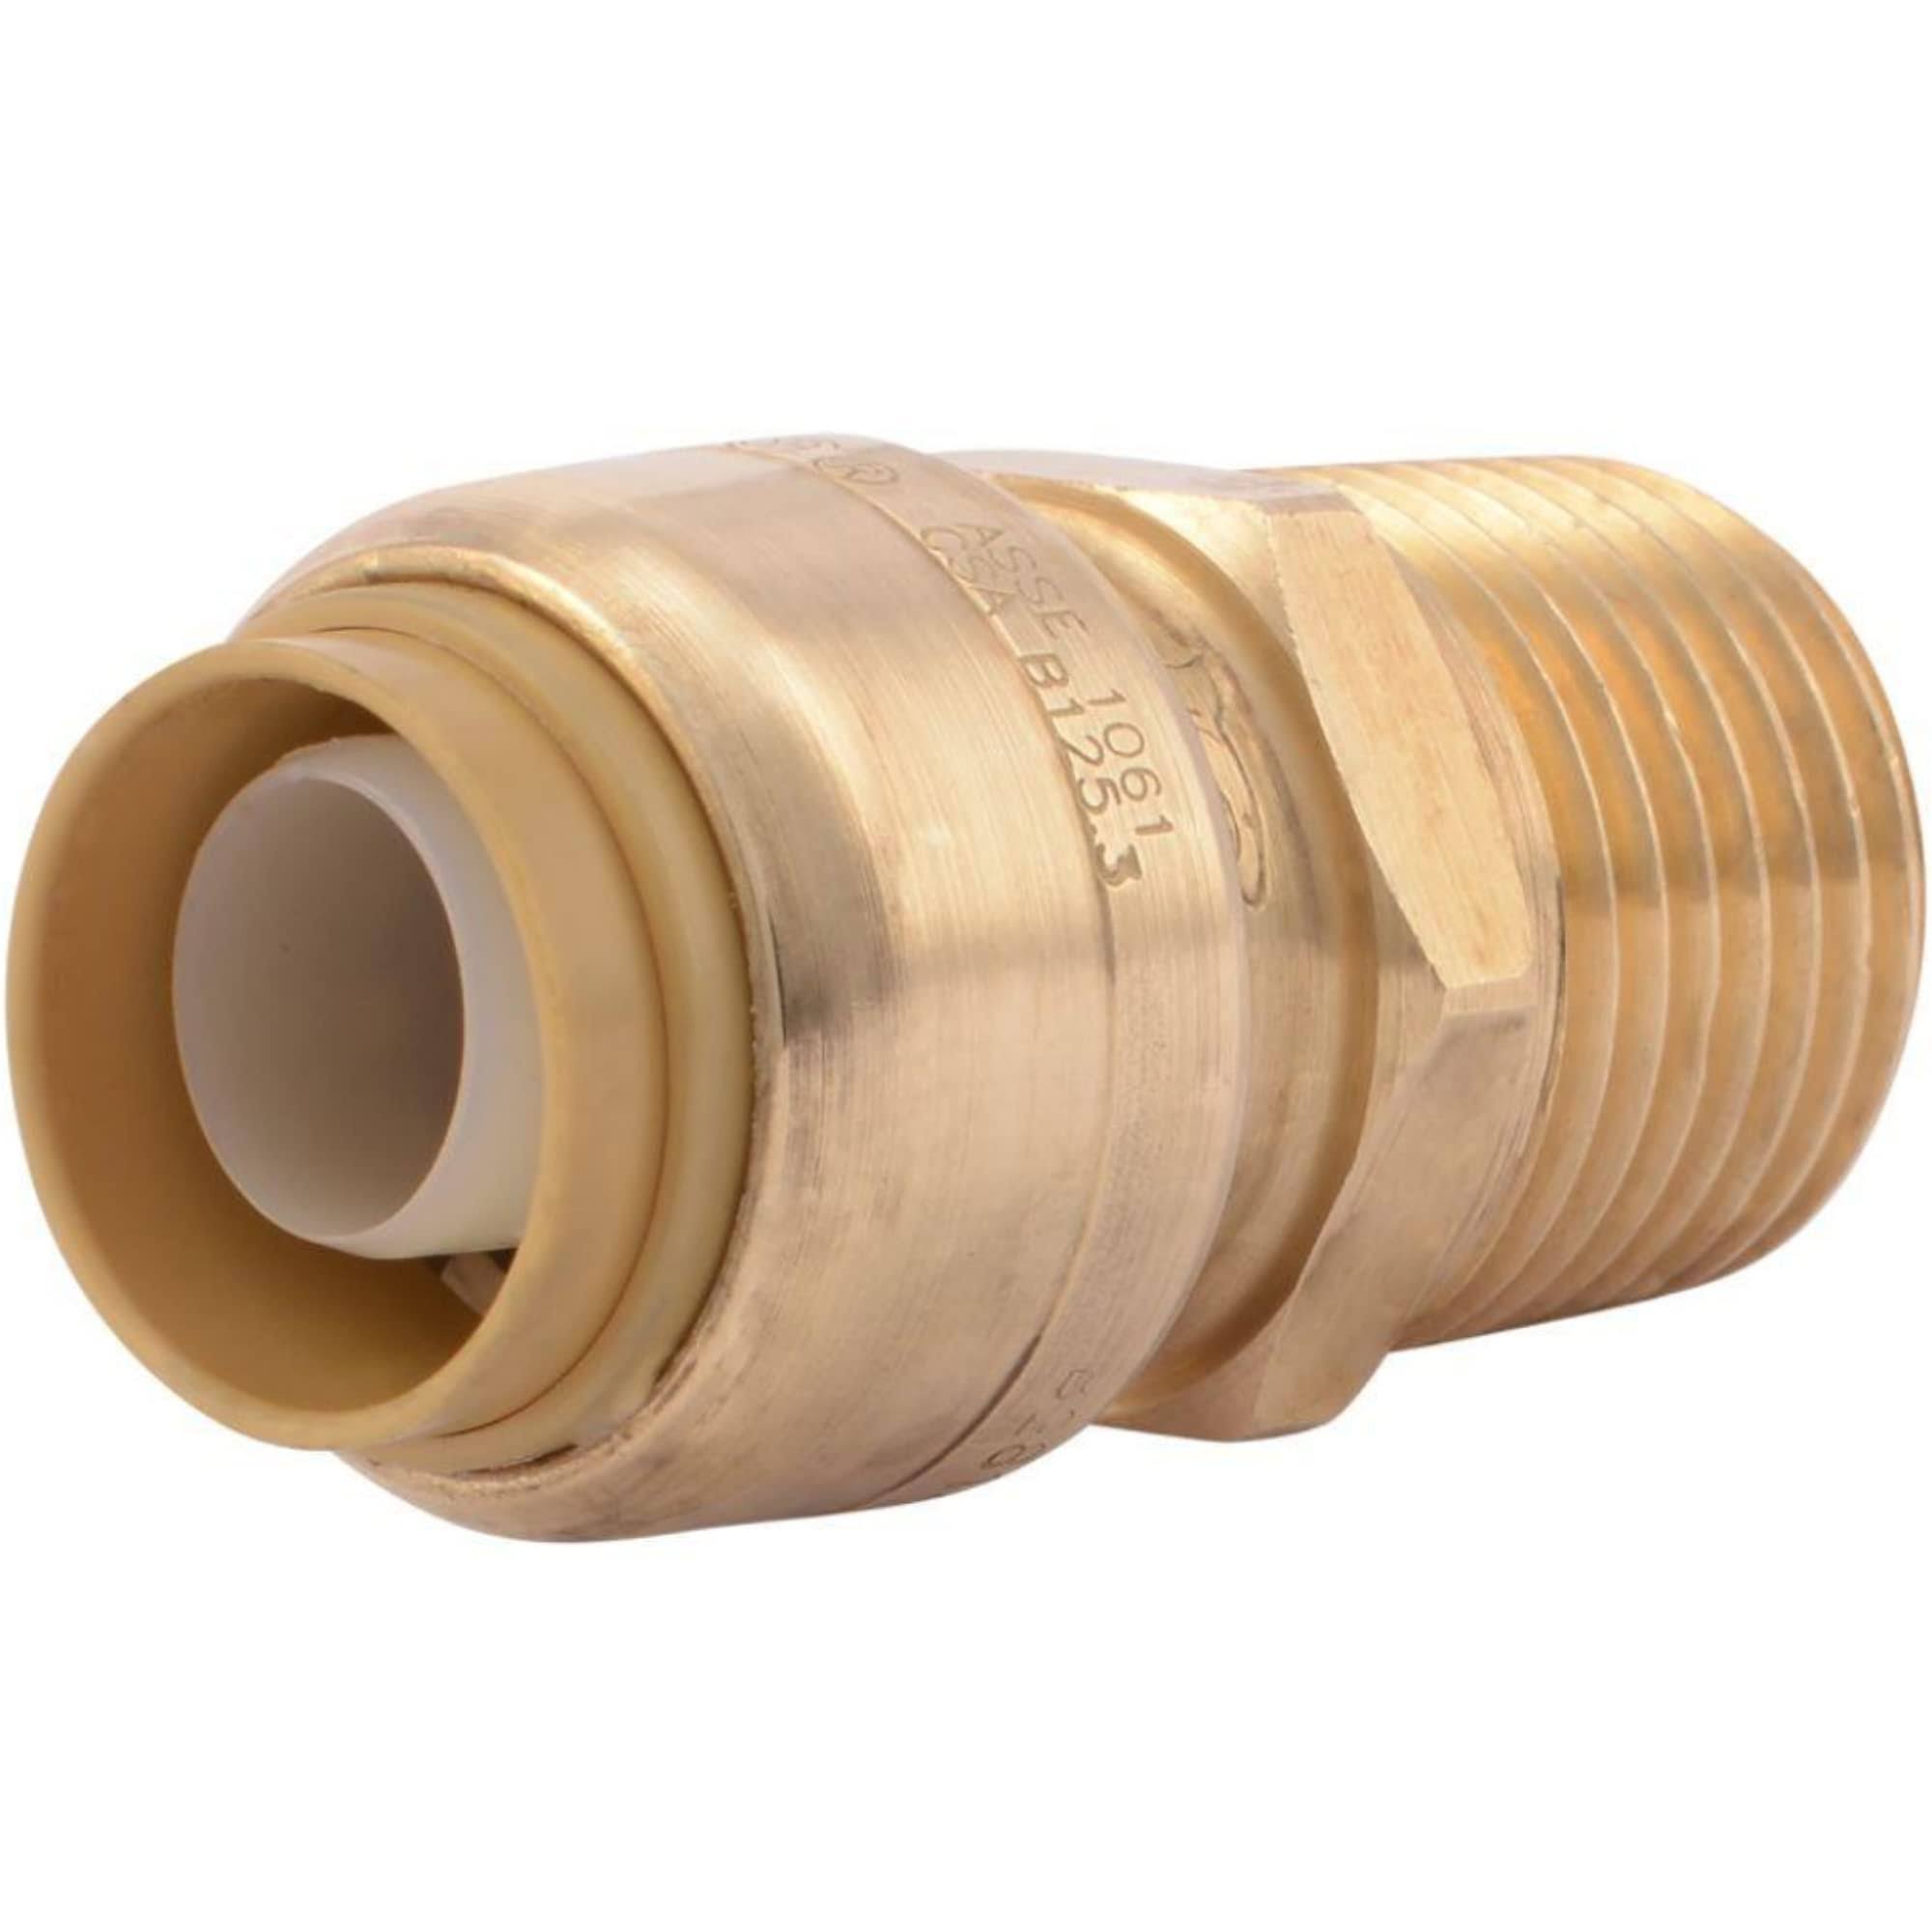 SharkBite Push-To-Connect x Male Pipe Thread Adapter - 0.5"